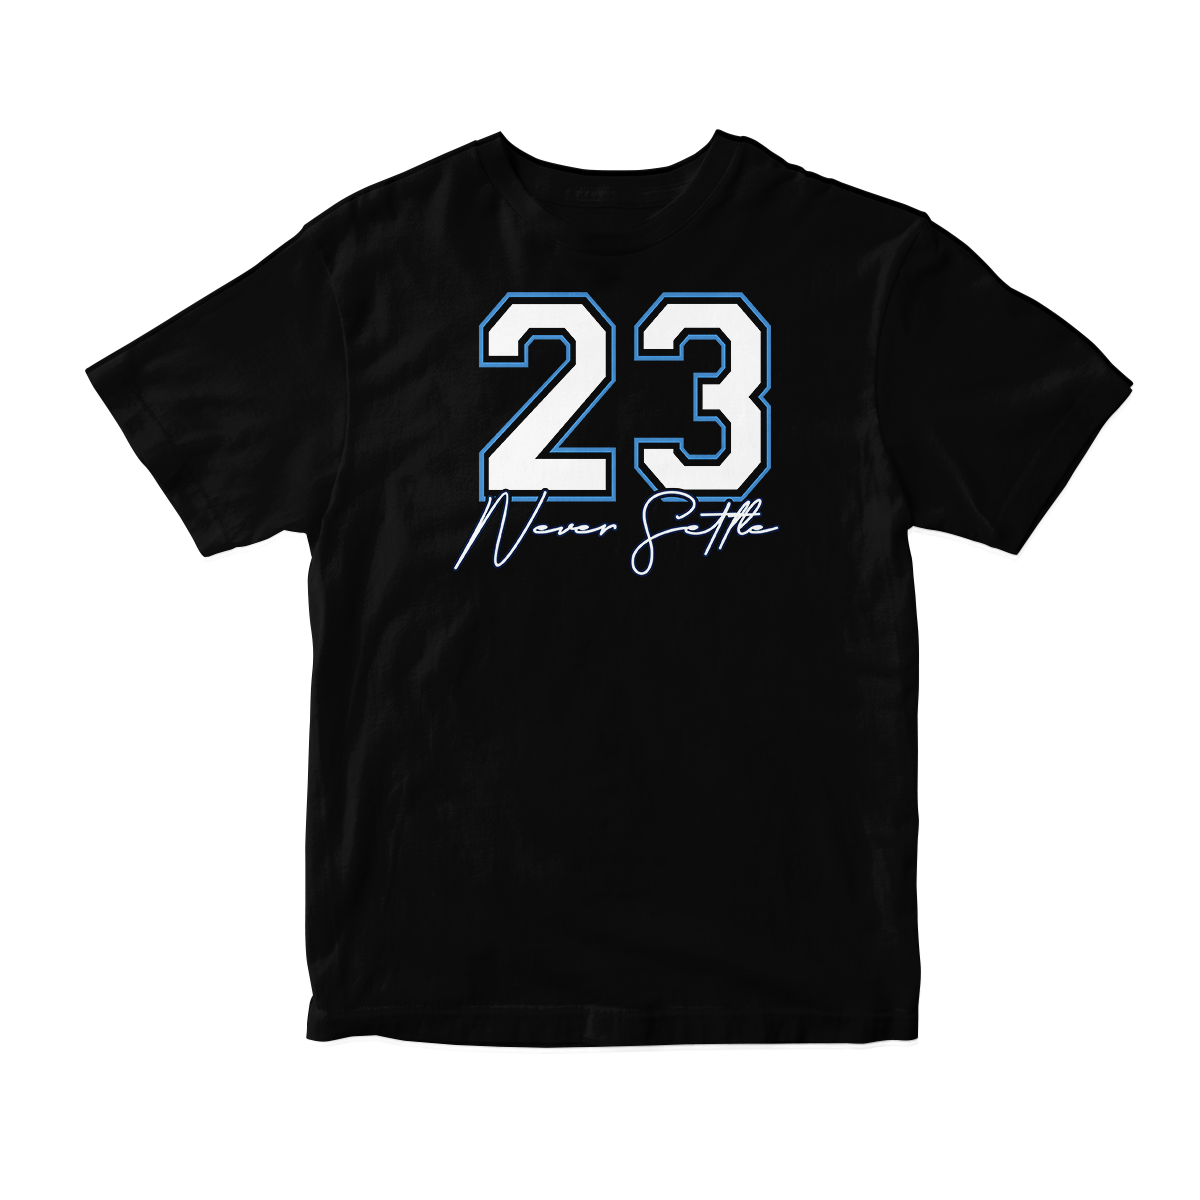 'Never Settle' in UNC CW Short Sleeve Tee